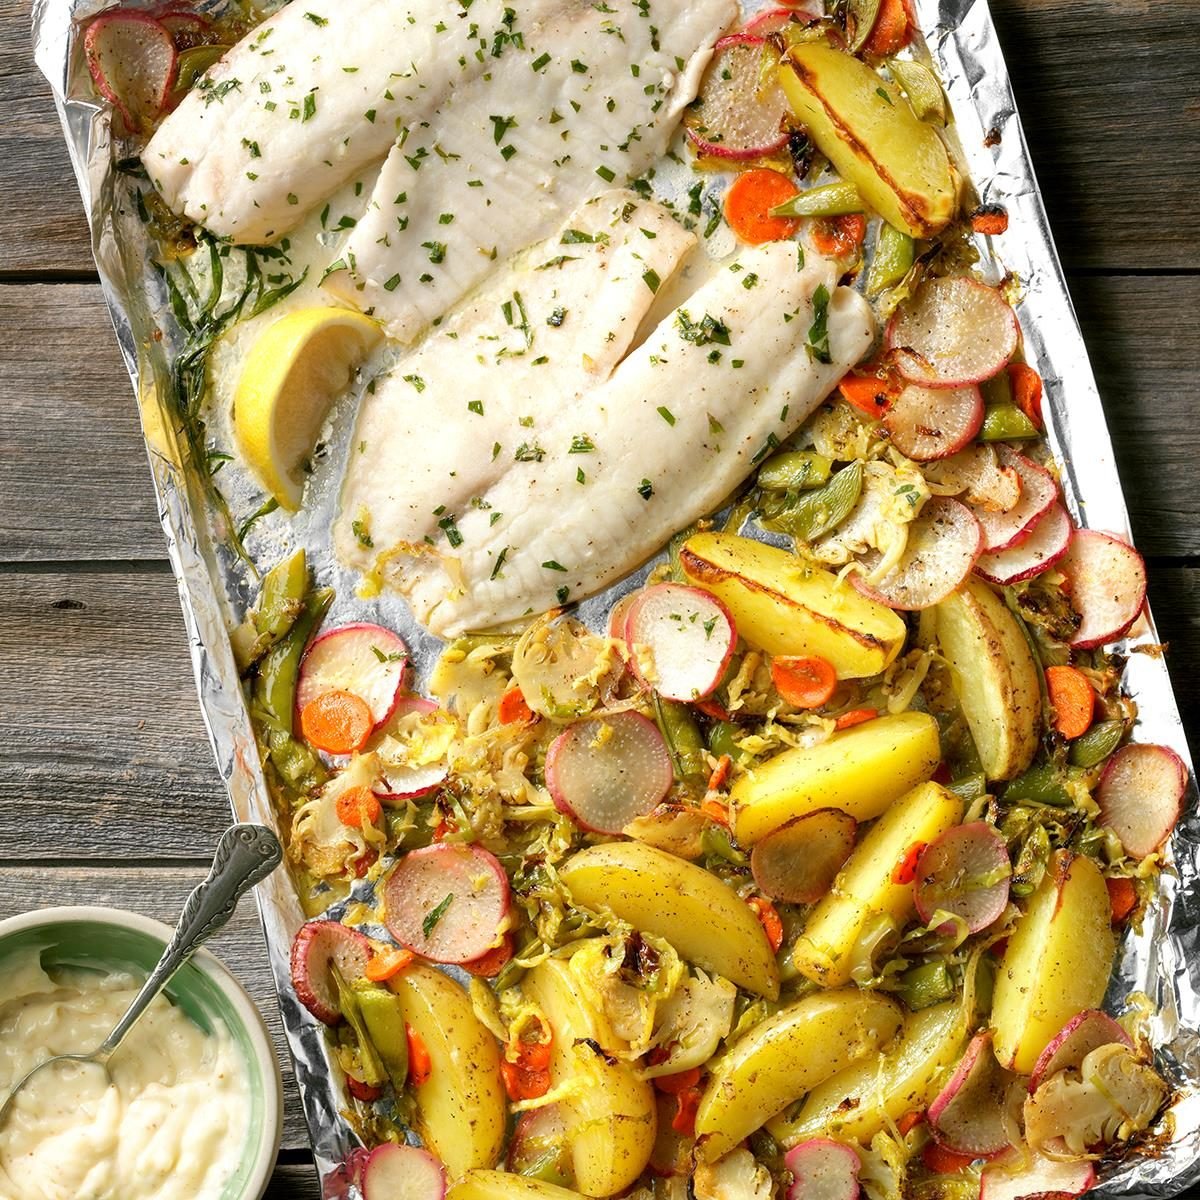 Day 23: Sheet Pan Tilapia and Vegetable Medley